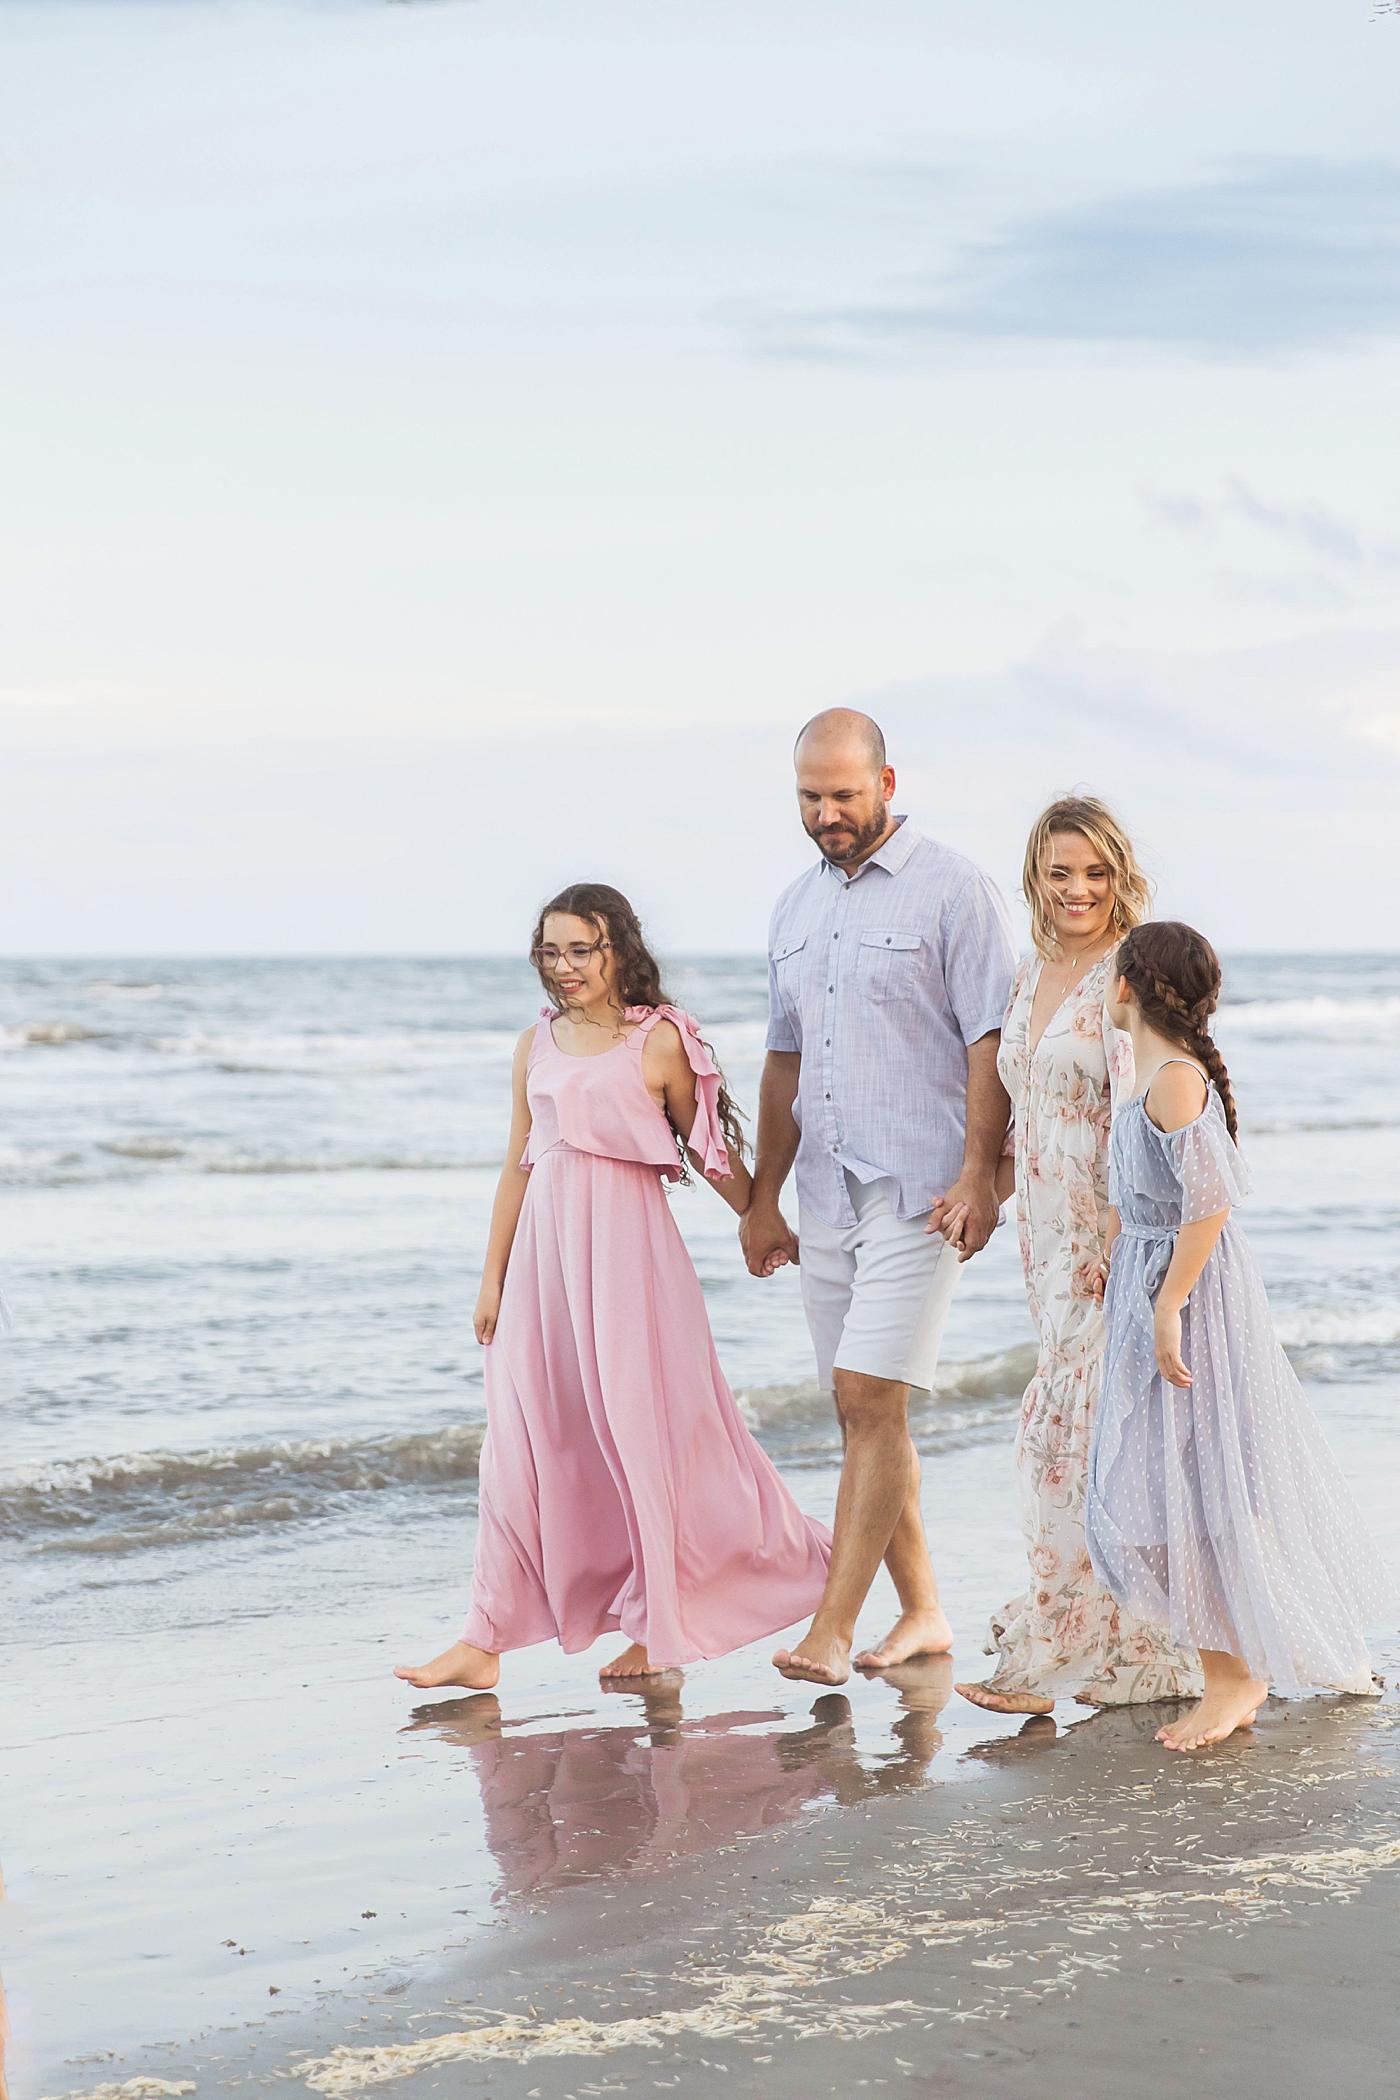 Family walking on the beach. Photo by Fresh Light Photography.